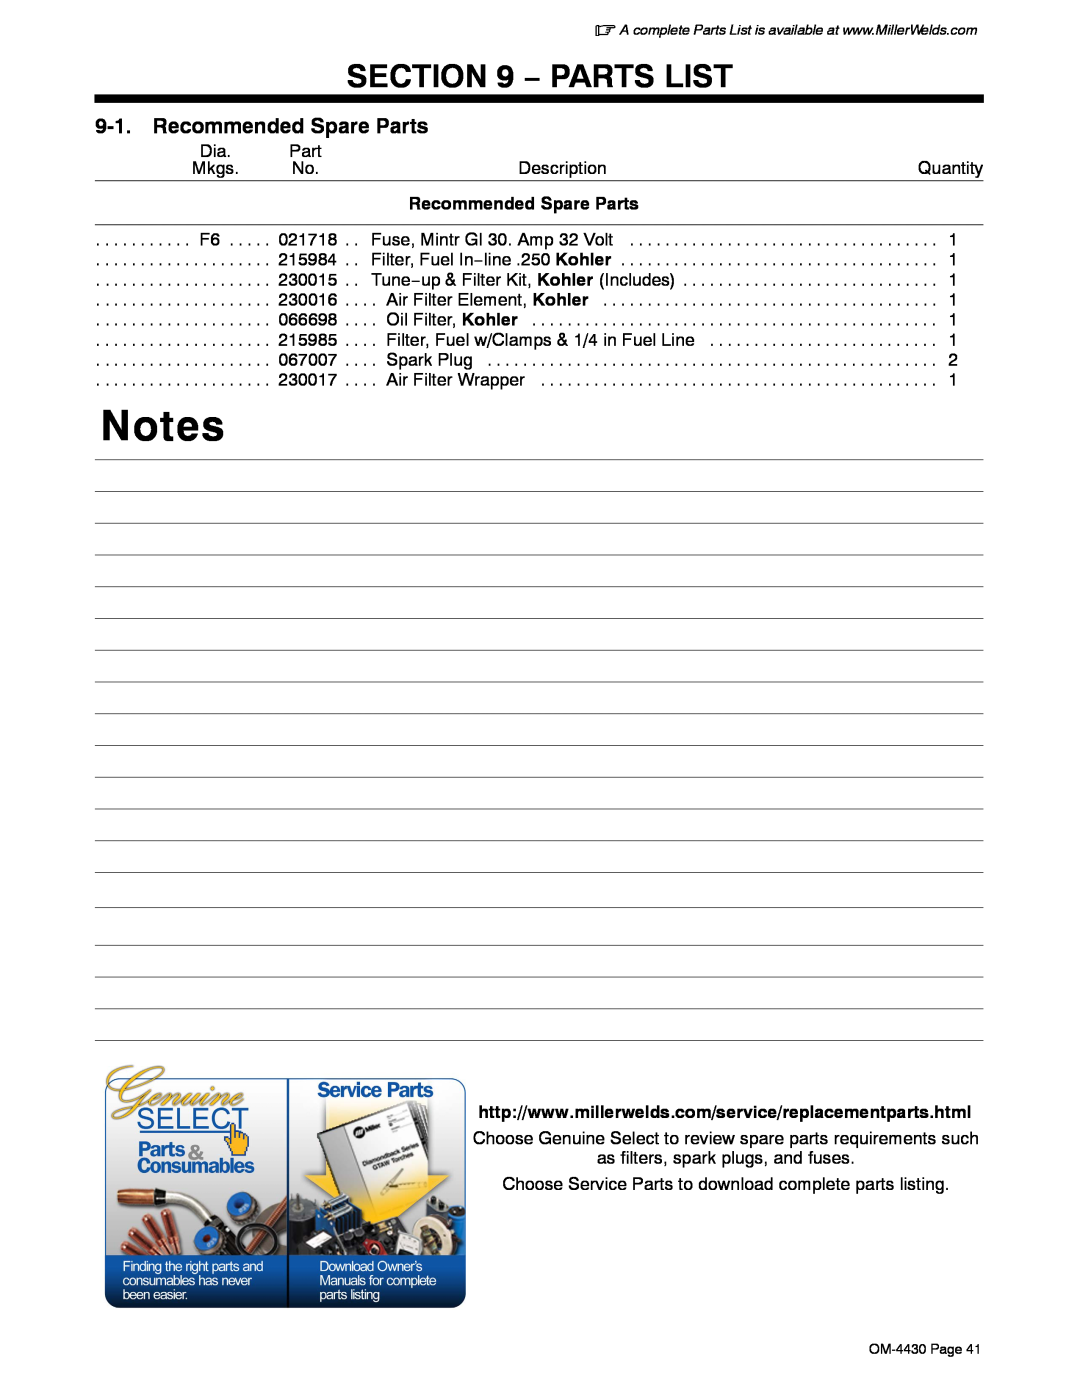 Miller Electric 280 NT manual Parts List, Recommended Spare Parts 